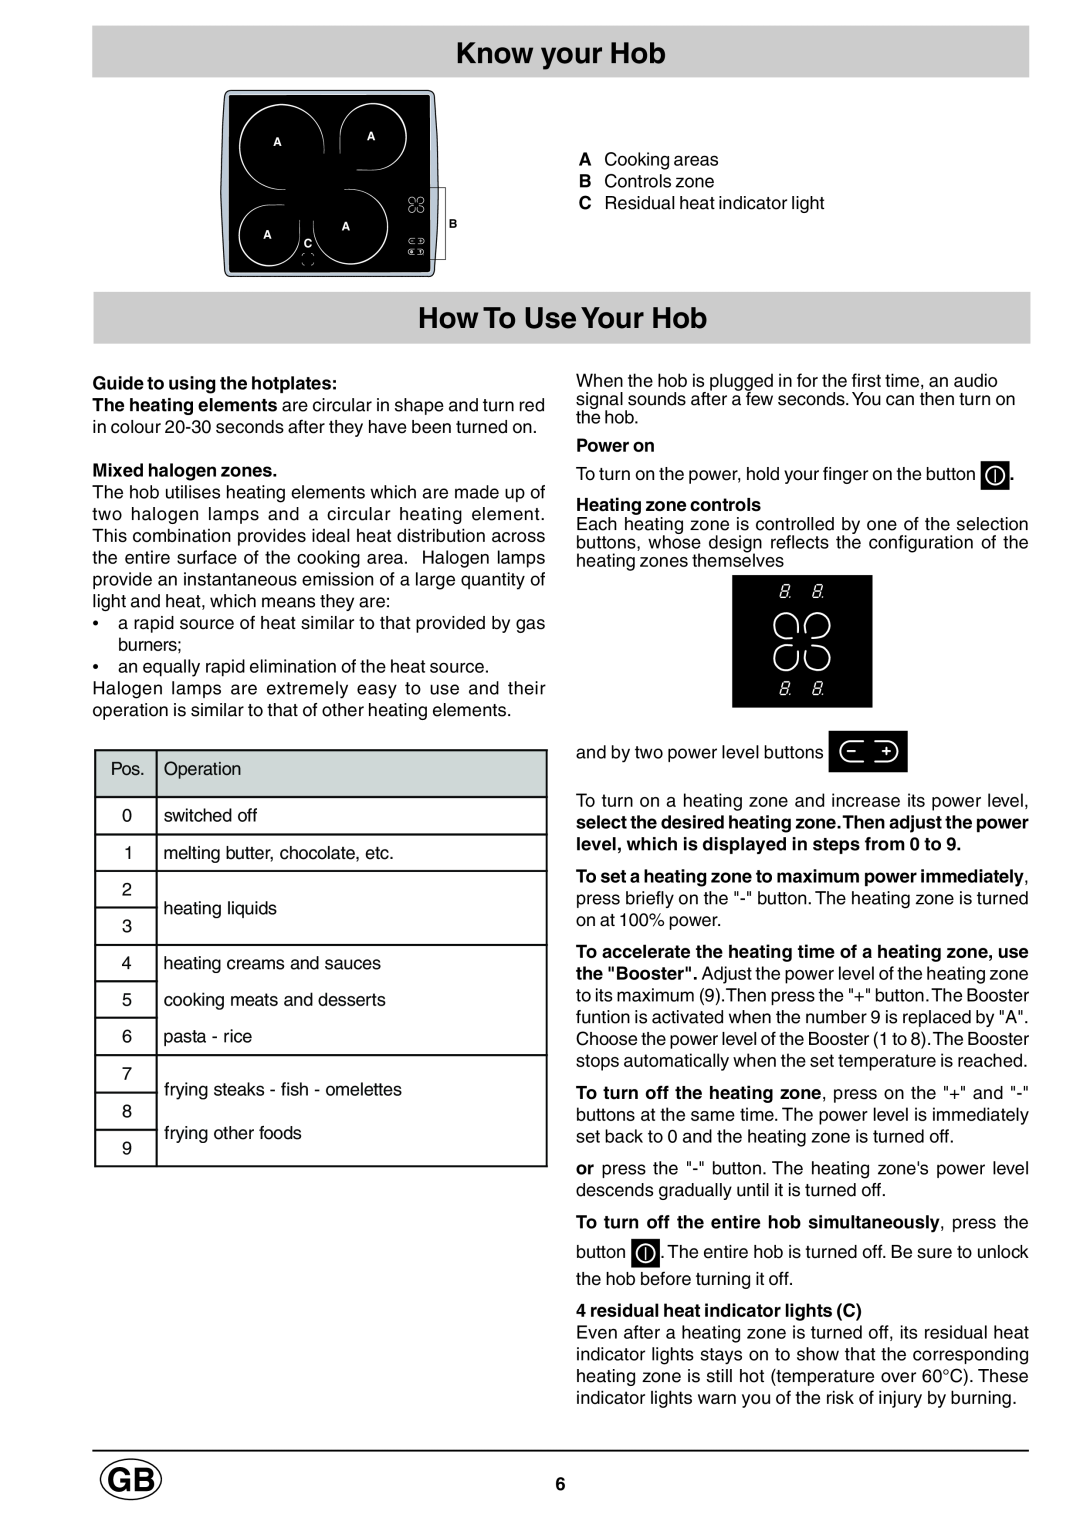 Hotpoint E6004 Know your Hob, How To Use Your Hob, Guide to using the hotplates, Mixed halogen zones, Power on, 8.8 8.8 